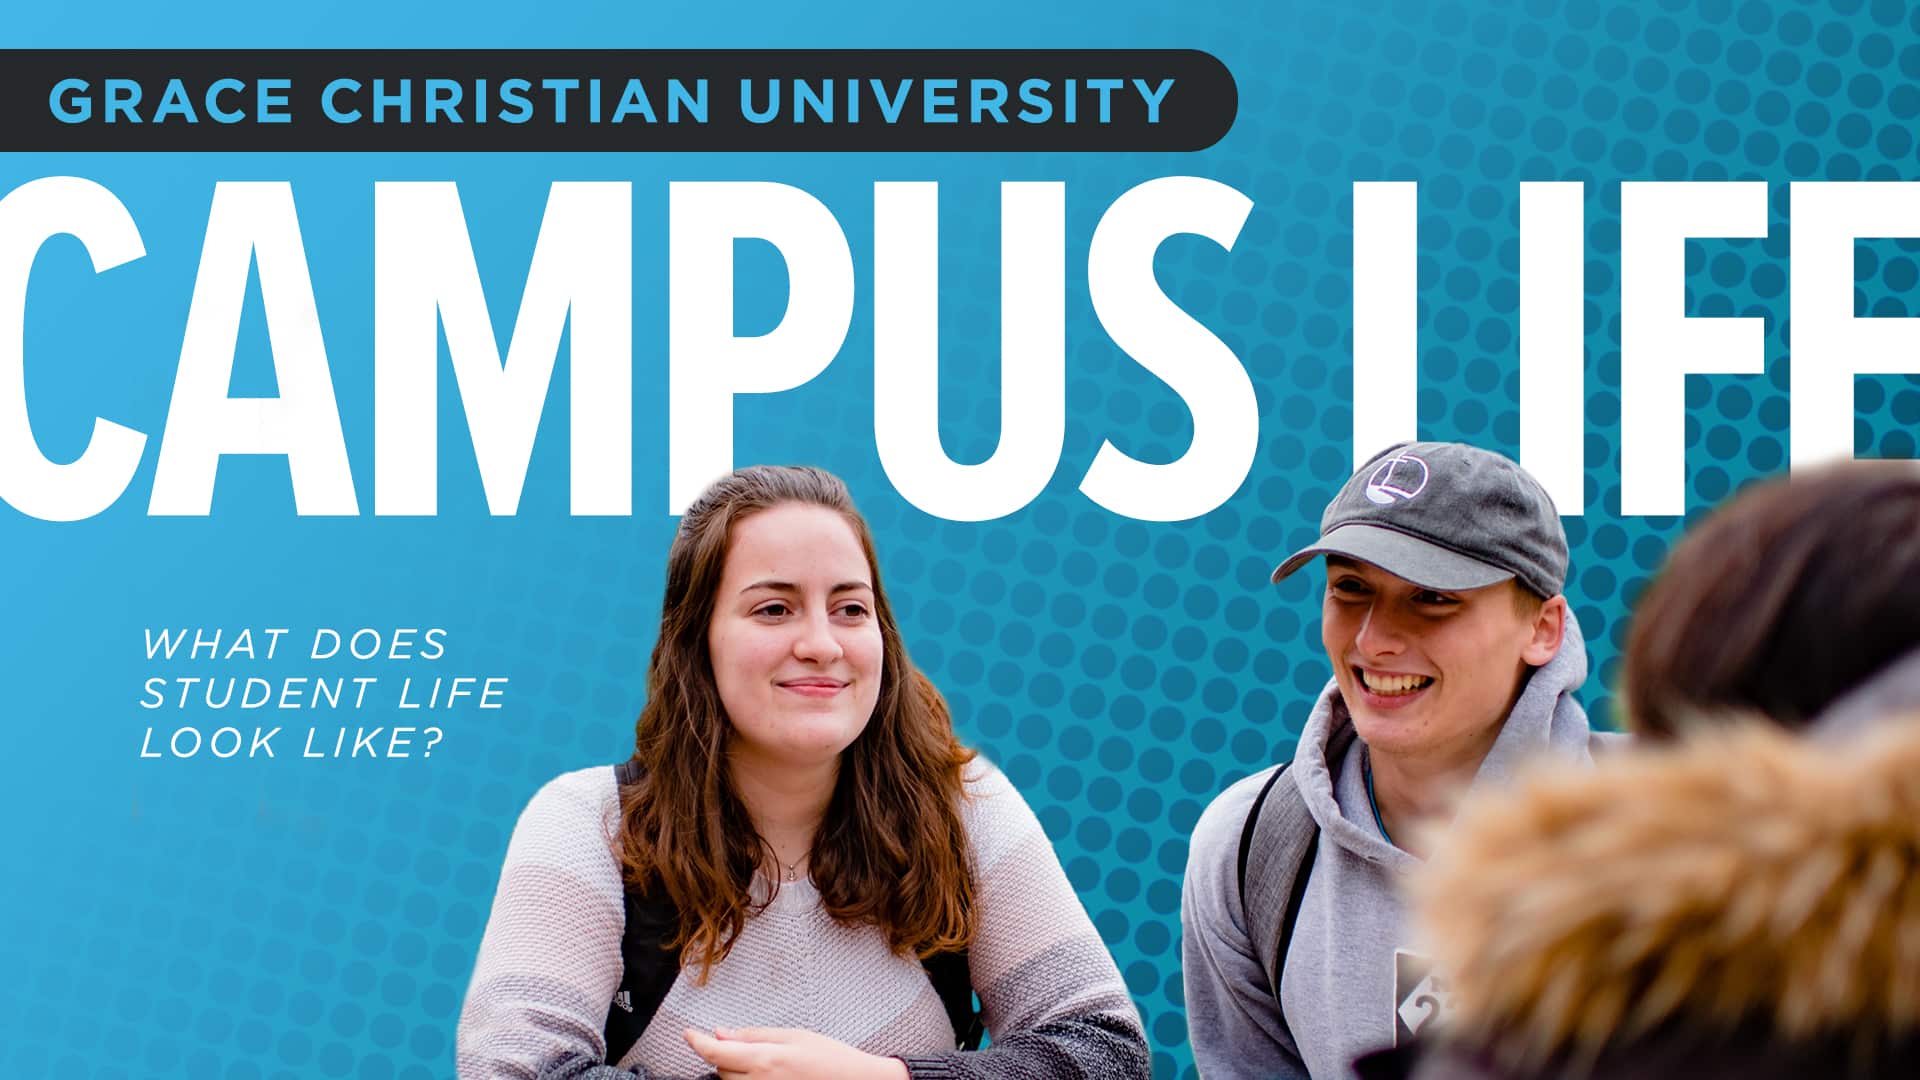 Grace Christian University Campus Life – What Does Student Life Look Like?